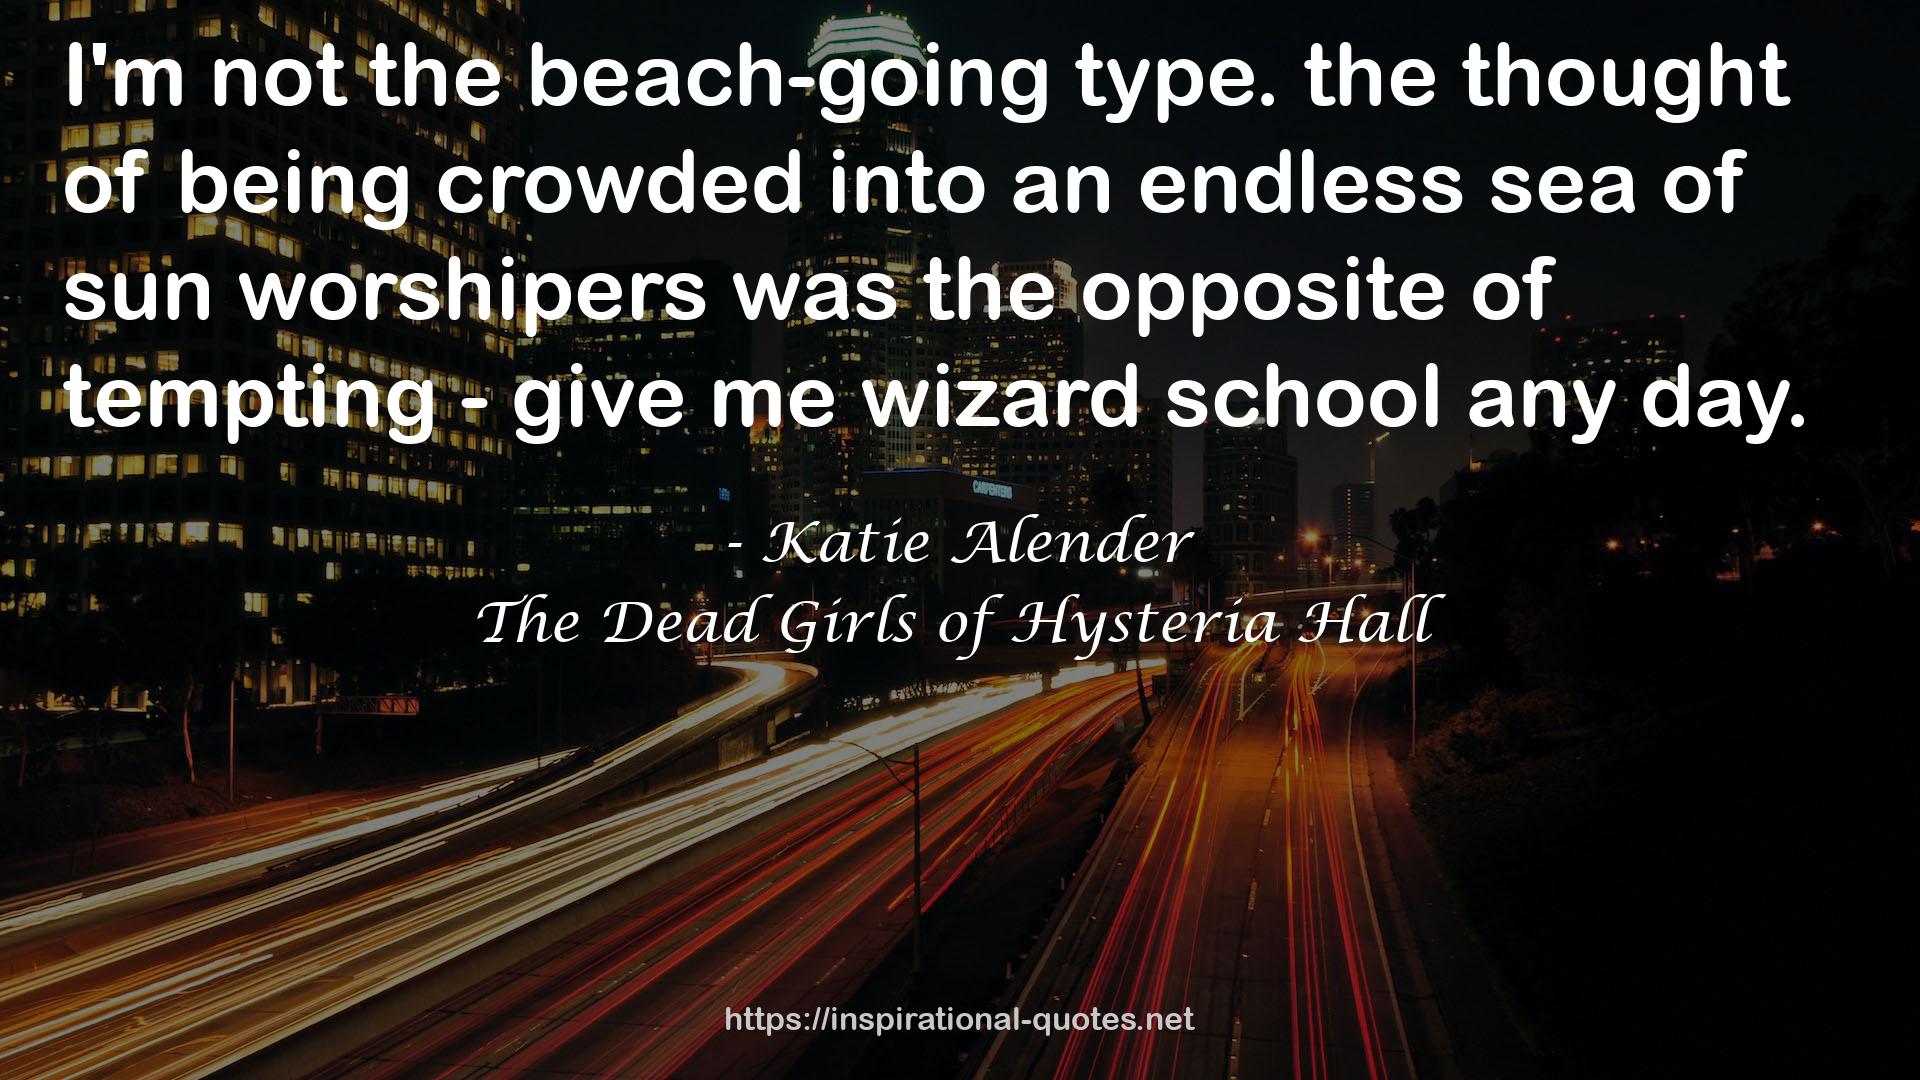 The Dead Girls of Hysteria Hall QUOTES